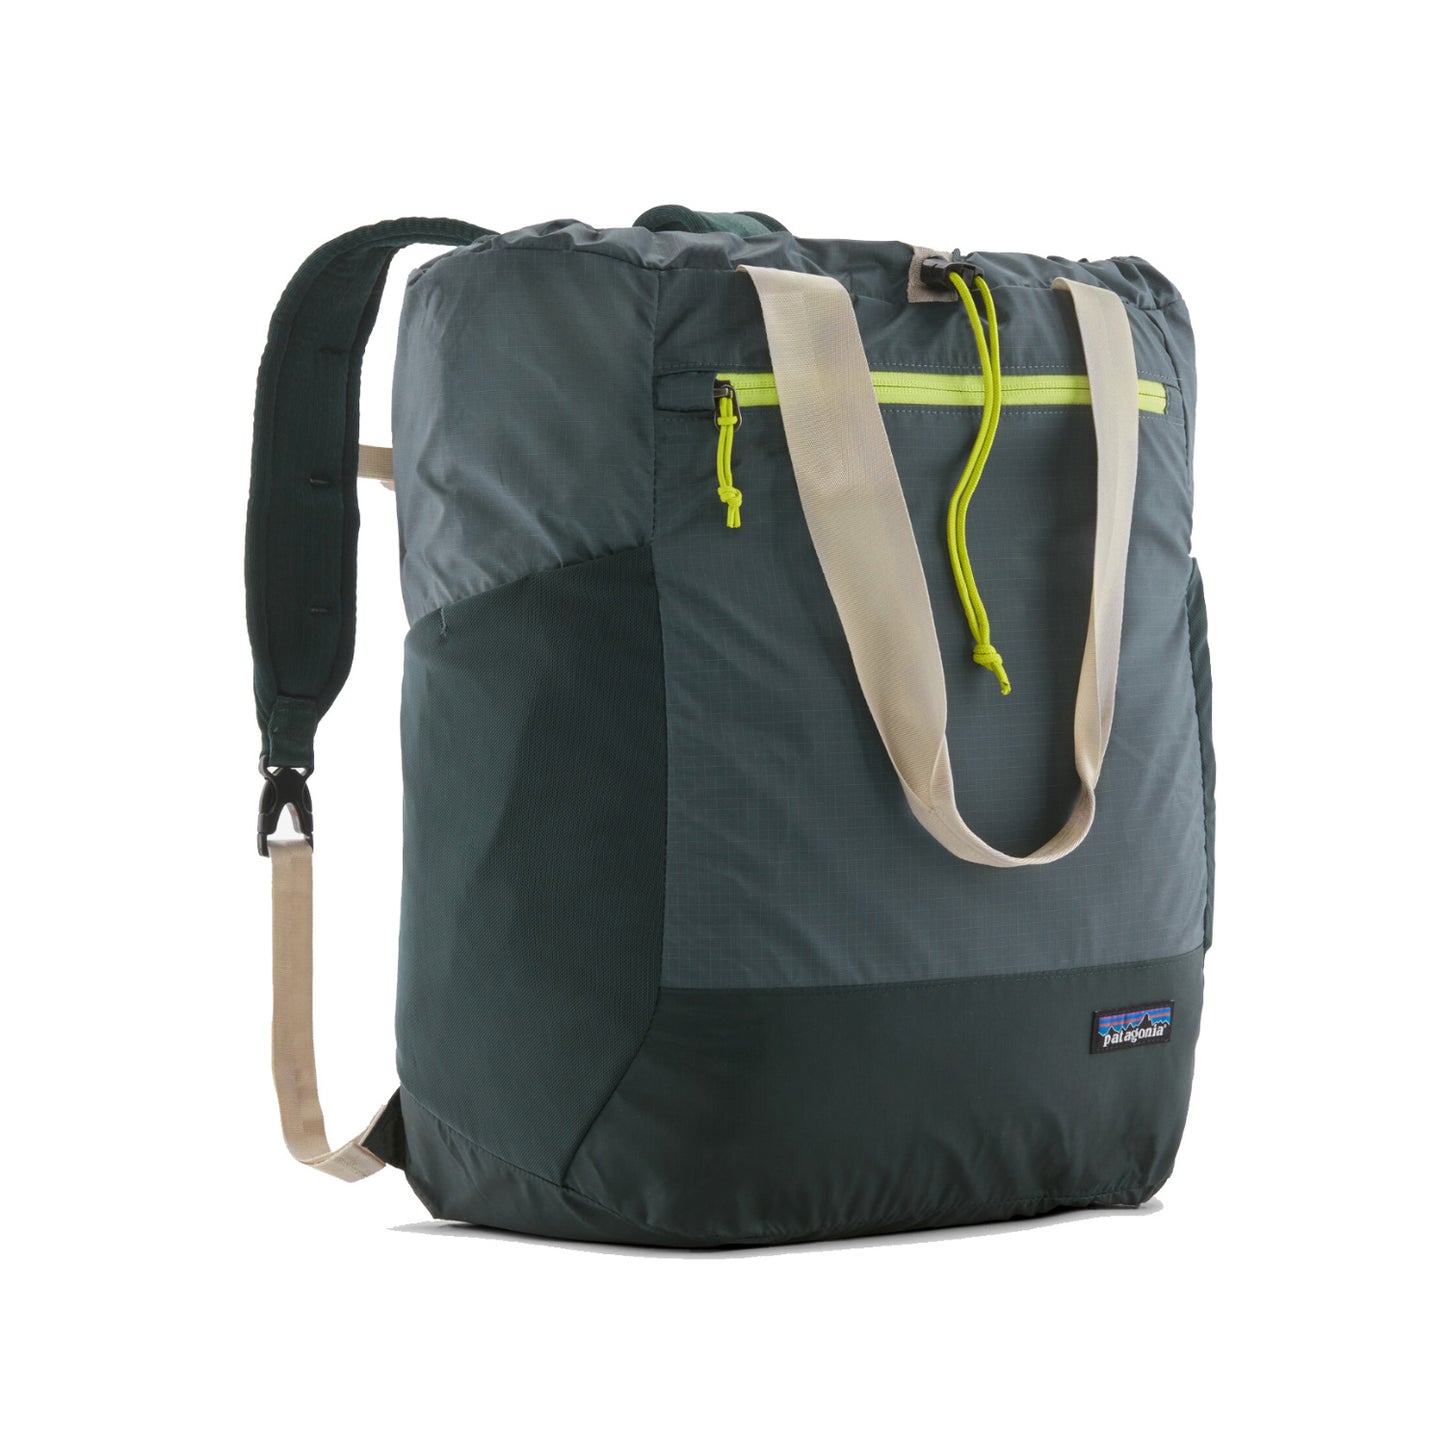 patagonia(パタゴニア) Ultralight Black Hole Tote Pack 48809 